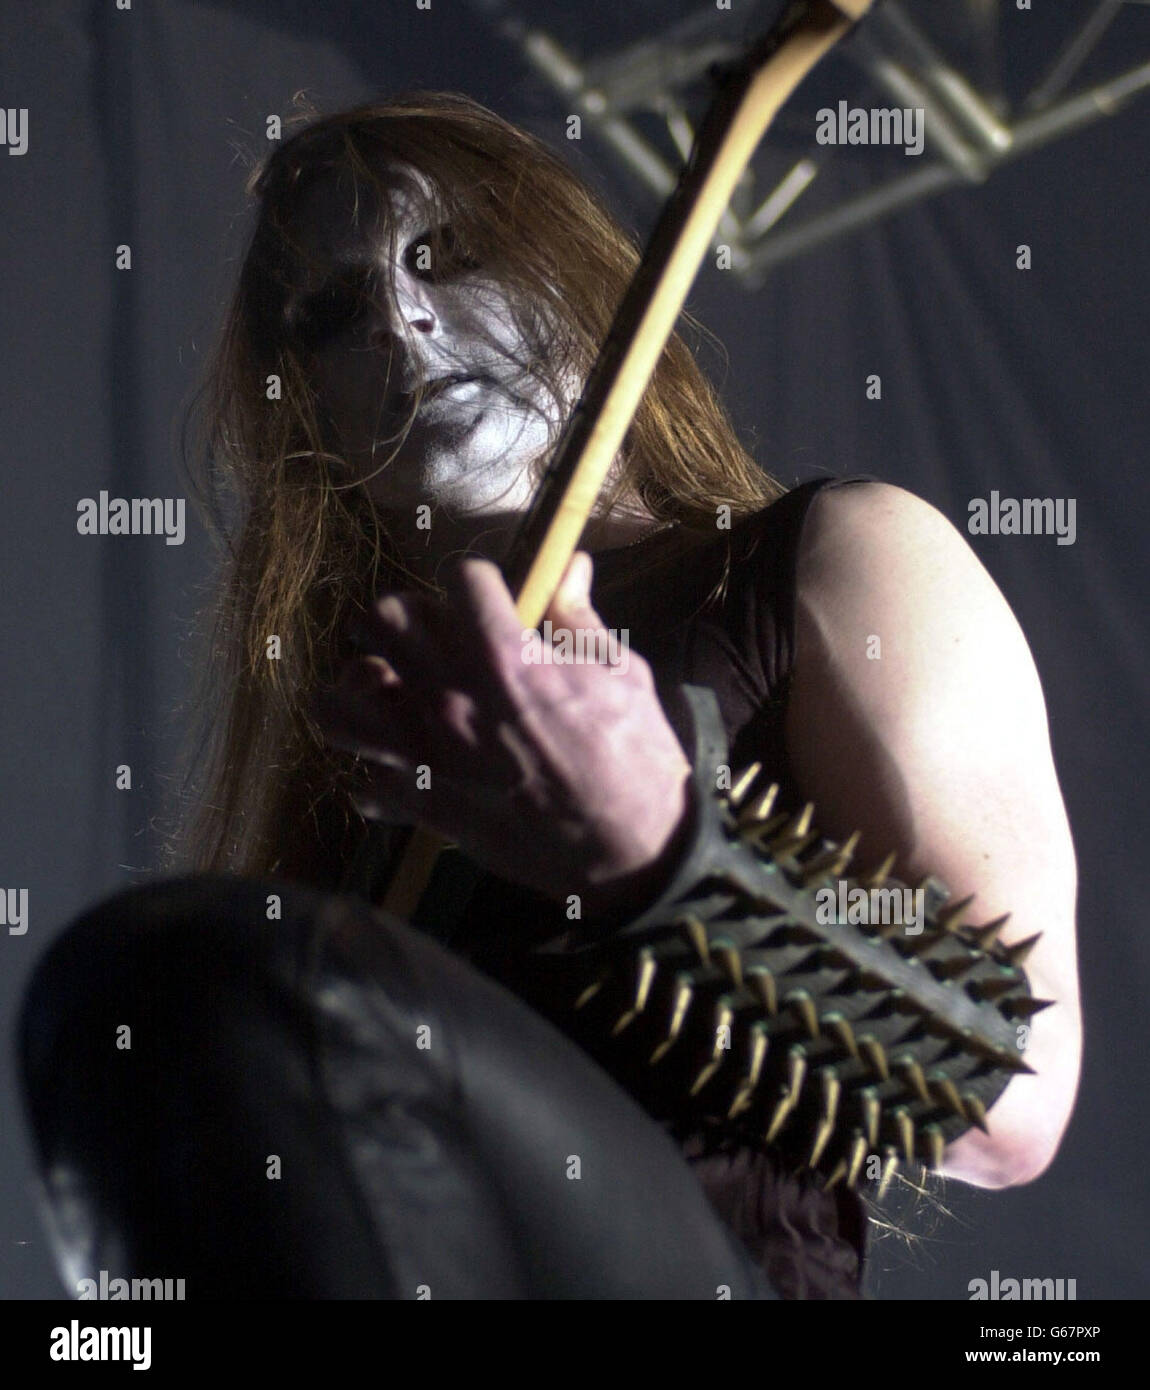 Norwegian 'black metal' band Satyricon's frontman playing at the Temple Bar Music Centre in Dublin. The group known for flirtations with Devil worship and white face paint have been together for just over ten years and are currently touring Europe. Stock Photo